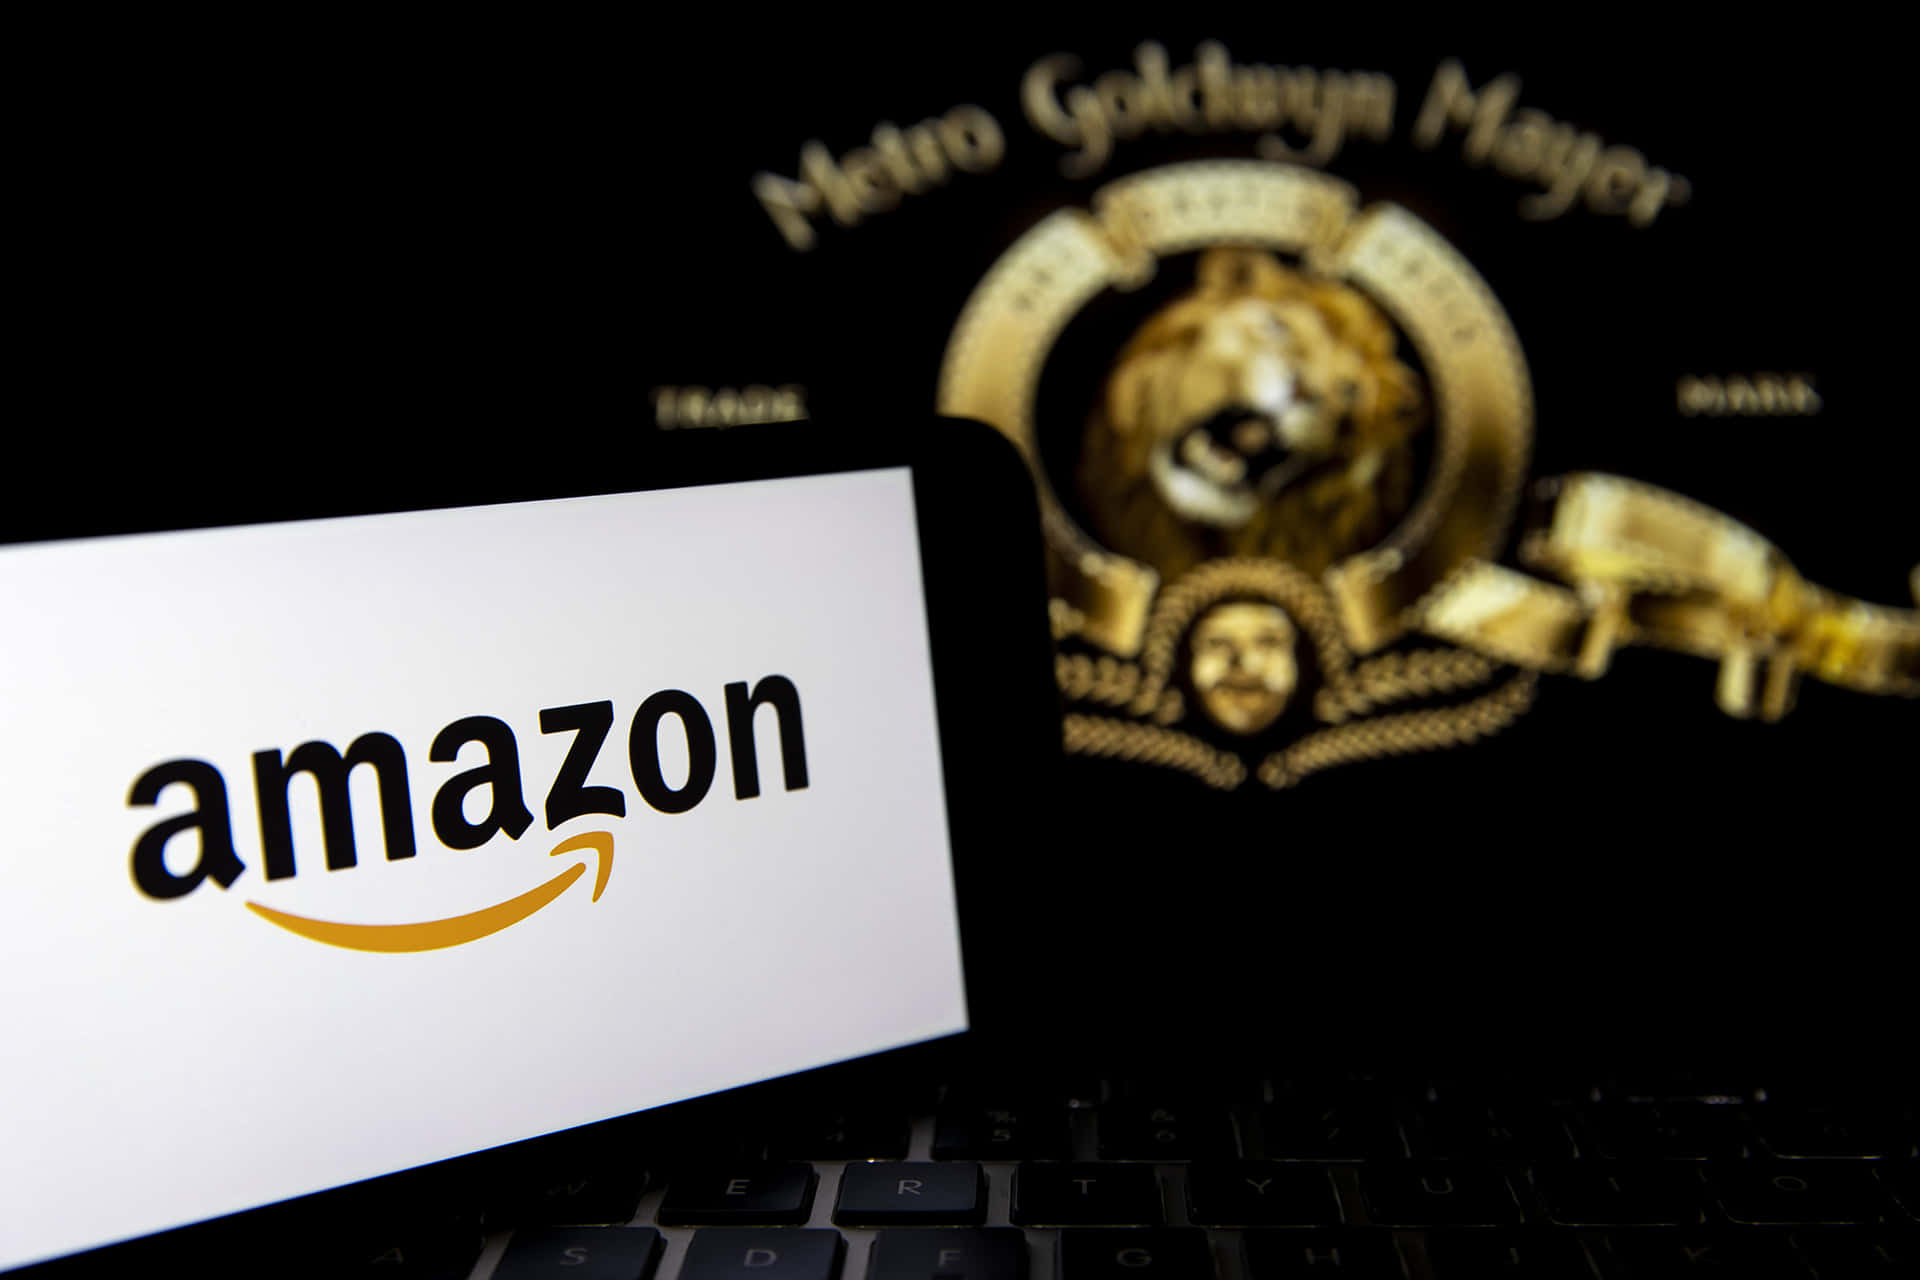 Amazon UK joining forces with MGM Studios Wallpaper